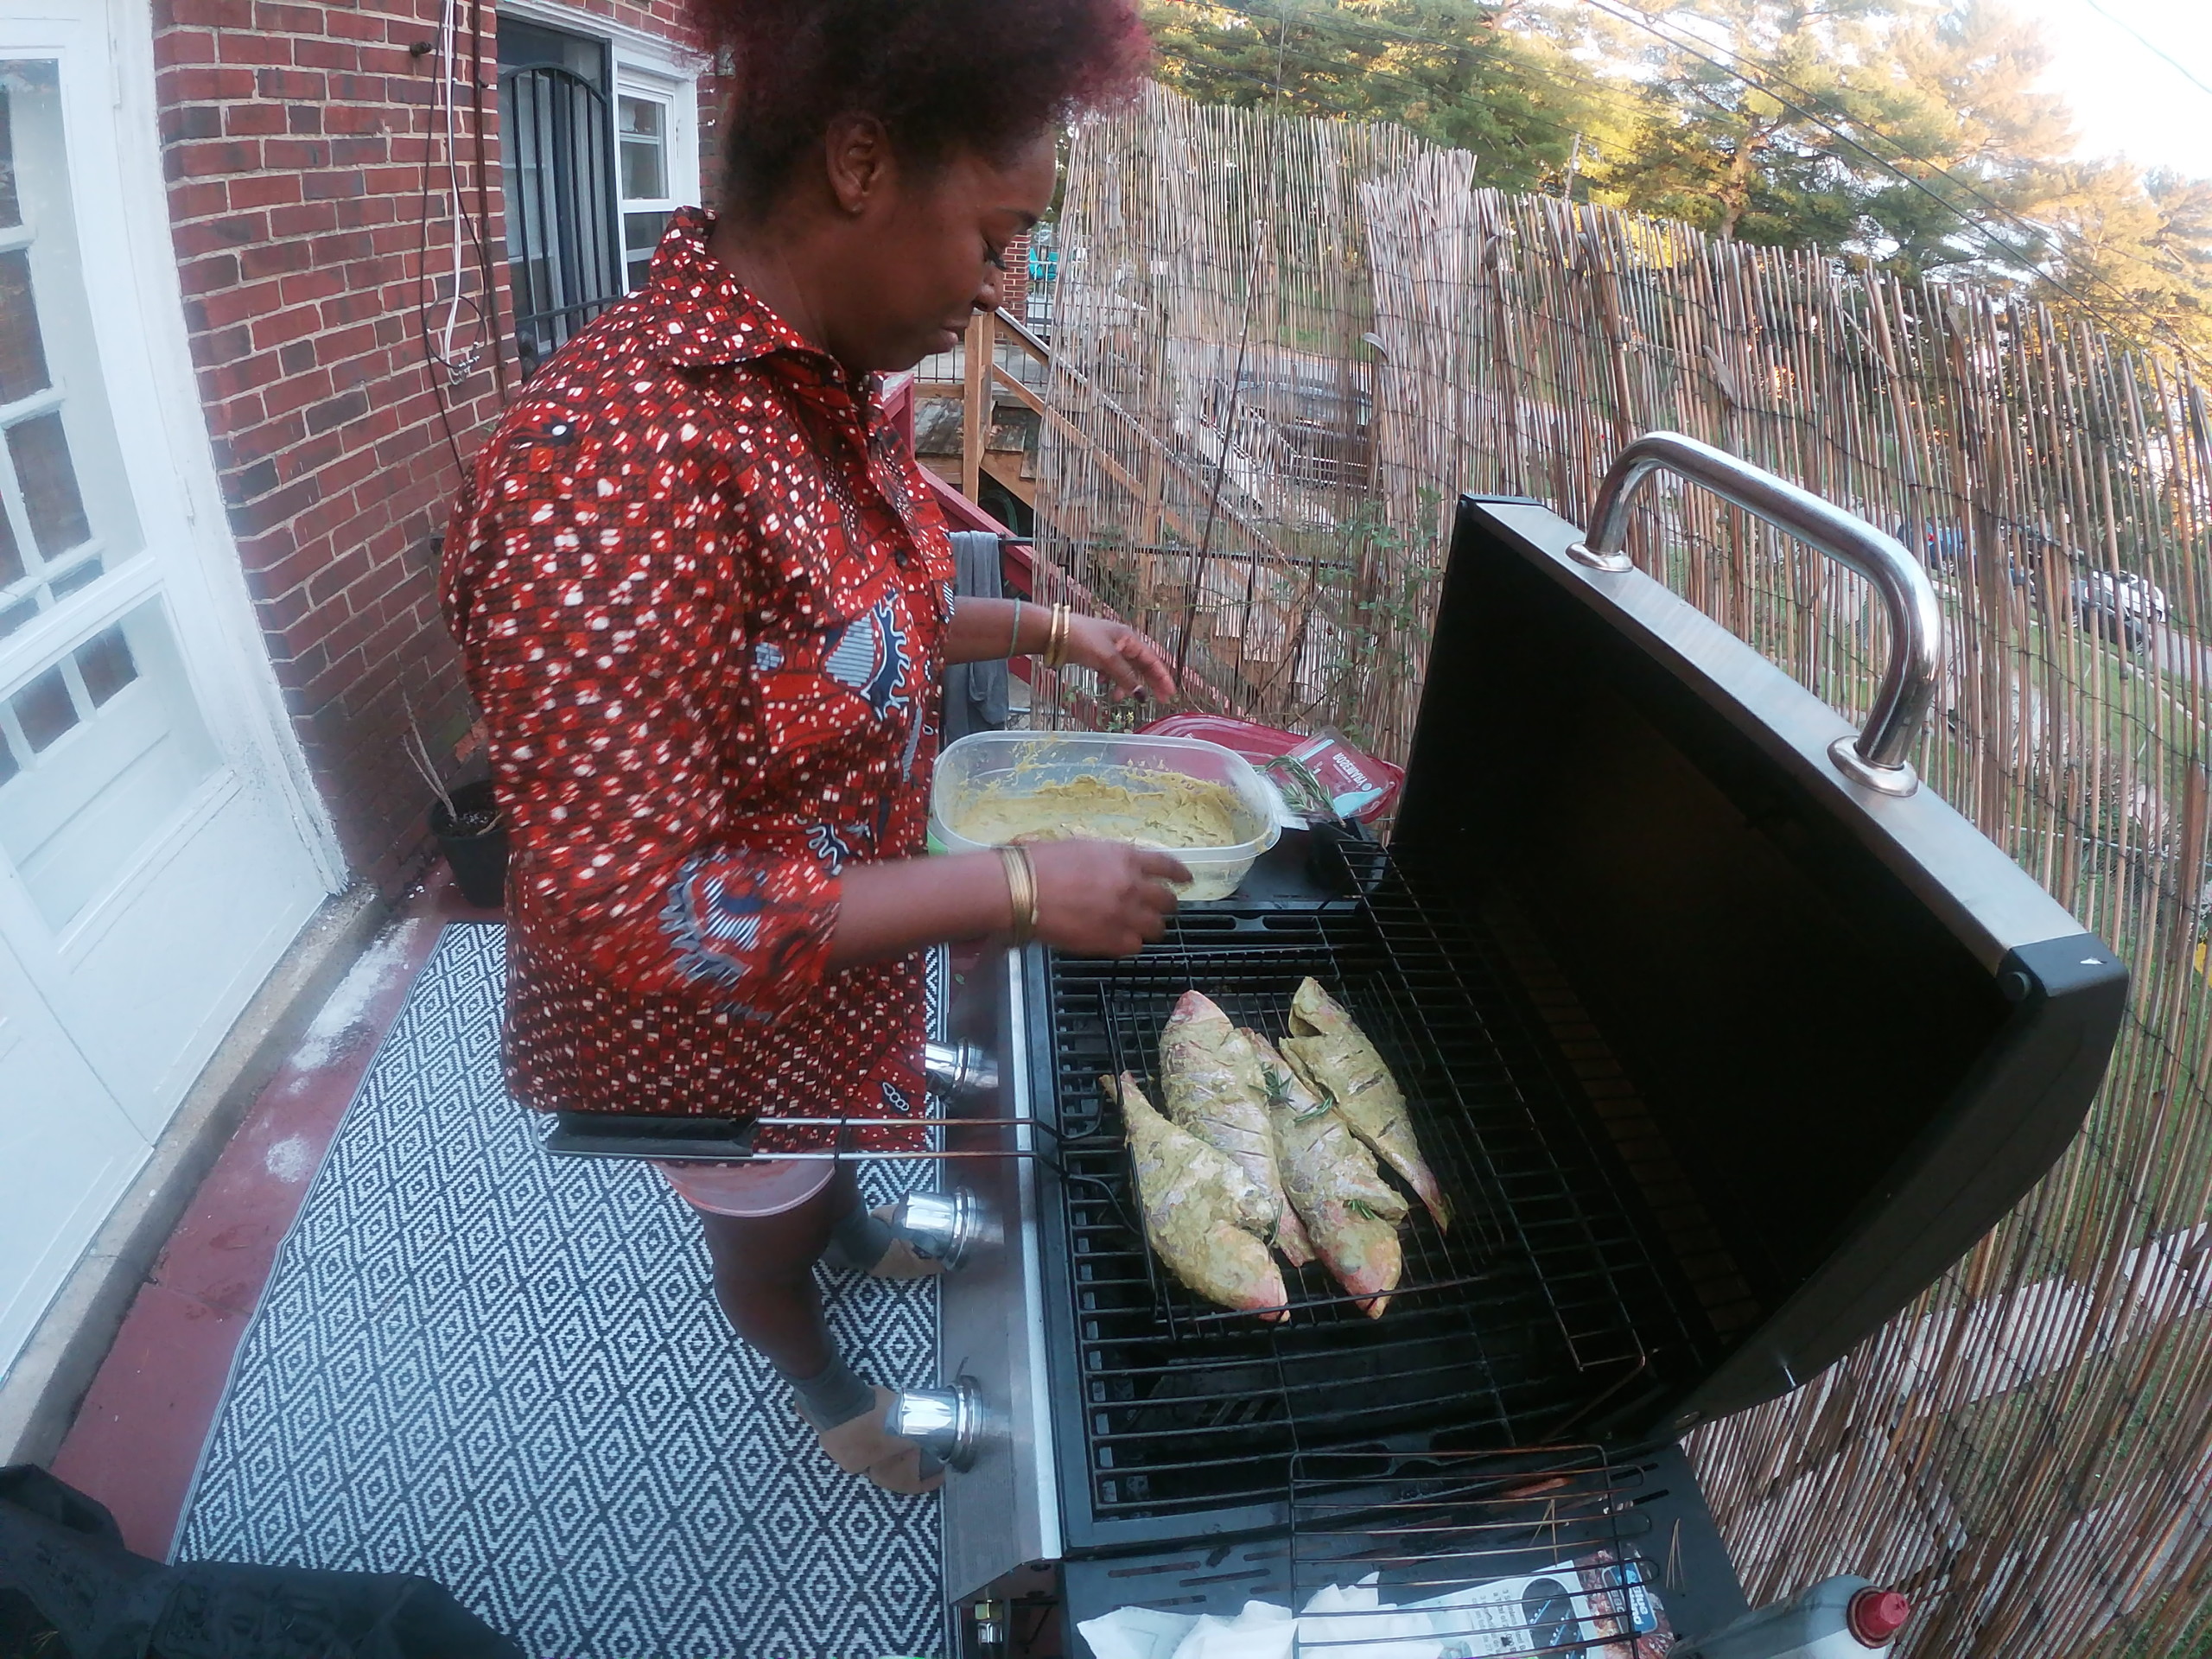 A dark-skinned woman stands on an outdoor balcony, grilling four whole fish on a gas grill. She holds a Tupperware of marinade. The photo is taken with a GoPro, creating a fish eye angle of the scene.